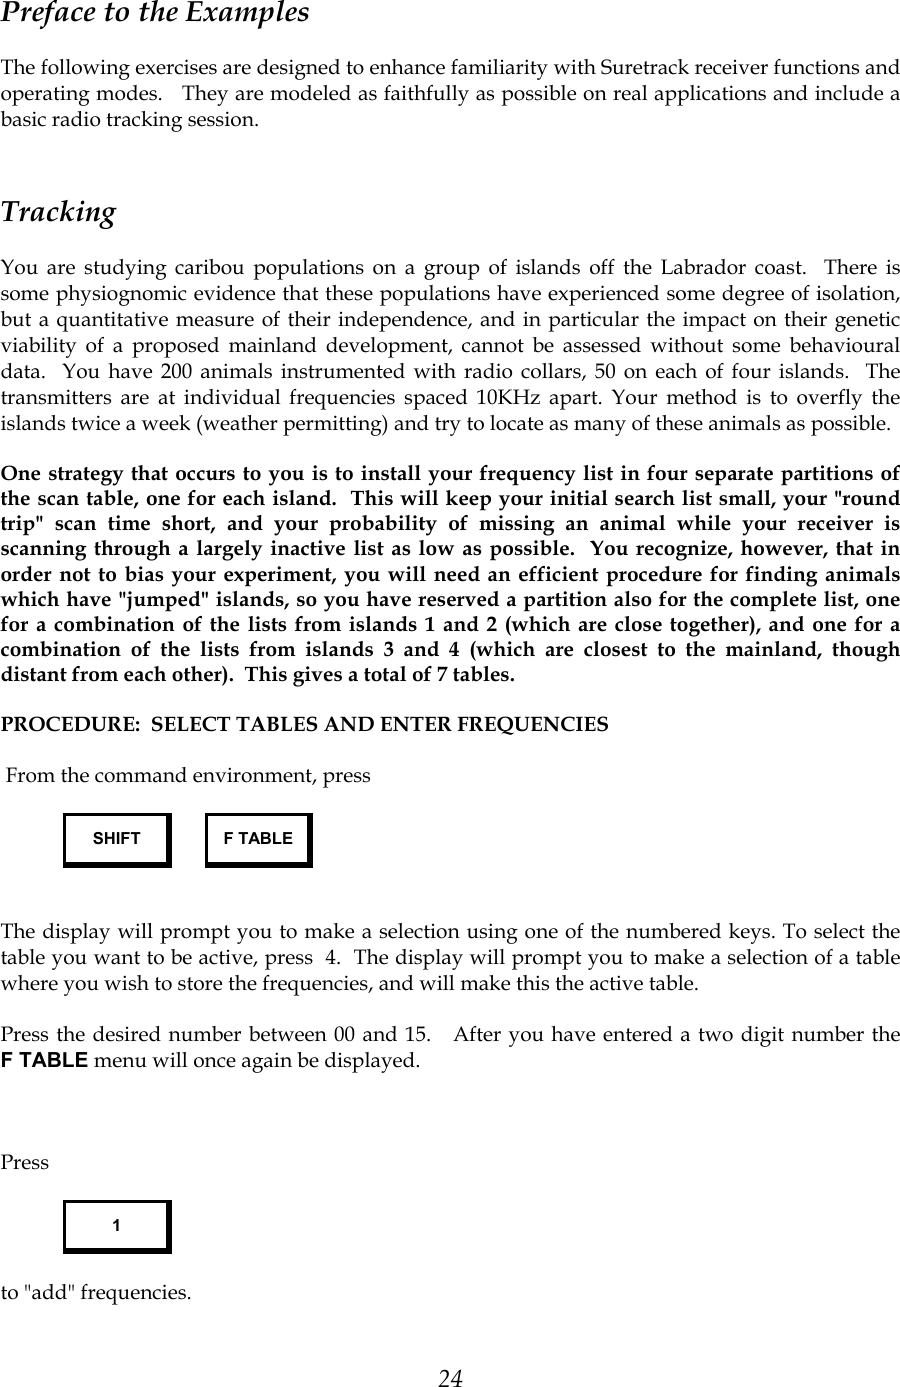 24 Preface to the Examples The following exercises are designed to enhance familiarity with Suretrack receiver functions and operating modes.   They are modeled as faithfully as possible on real applications and include a basic radio tracking session. Tracking You are studying caribou populations on a group of islands off the Labrador coast.  There is some physiognomic evidence that these populations have experienced some degree of isolation, but a quantitative measure of their independence, and in particular the impact on their genetic viability of a proposed mainland development, cannot be assessed without some behavioural data.  You have 200 animals instrumented with radio collars, 50 on each of four islands.  The transmitters are at individual frequencies spaced 10KHz apart. Your method is to overfly the islands twice a week (weather permitting) and try to locate as many of these animals as possible. One strategy that occurs to you is to install your frequency list in four separate partitions of the scan table, one for each island.  This will keep your initial search list small, your &quot;round trip&quot; scan time short, and your probability of missing an animal while your receiver is scanning through a largely inactive list as low as possible.  You recognize, however, that in order not to bias your experiment, you will need an efficient procedure for finding animals which have &quot;jumped&quot; islands, so you have reserved a partition also for the complete list, one for a combination of the lists from islands 1 and 2 (which are close together), and one for a combination of the lists from islands 3 and 4 (which are closest to the mainland, though distant from each other).  This gives a total of 7 tables.  PROCEDURE:  SELECT TABLES AND ENTER FREQUENCIES     From the command environment, press SHIFT  F TABLE                                             The display will prompt you to make a selection using one of the numbered keys. To select the table you want to be active, press  4.  The display will prompt you to make a selection of a table where you wish to store the frequencies, and will make this the active table.  Press the desired number between 00 and 15.   After you have entered a two digit number the F TABLE menu will once again be displayed.     Press  1 to &quot;add&quot; frequencies. 